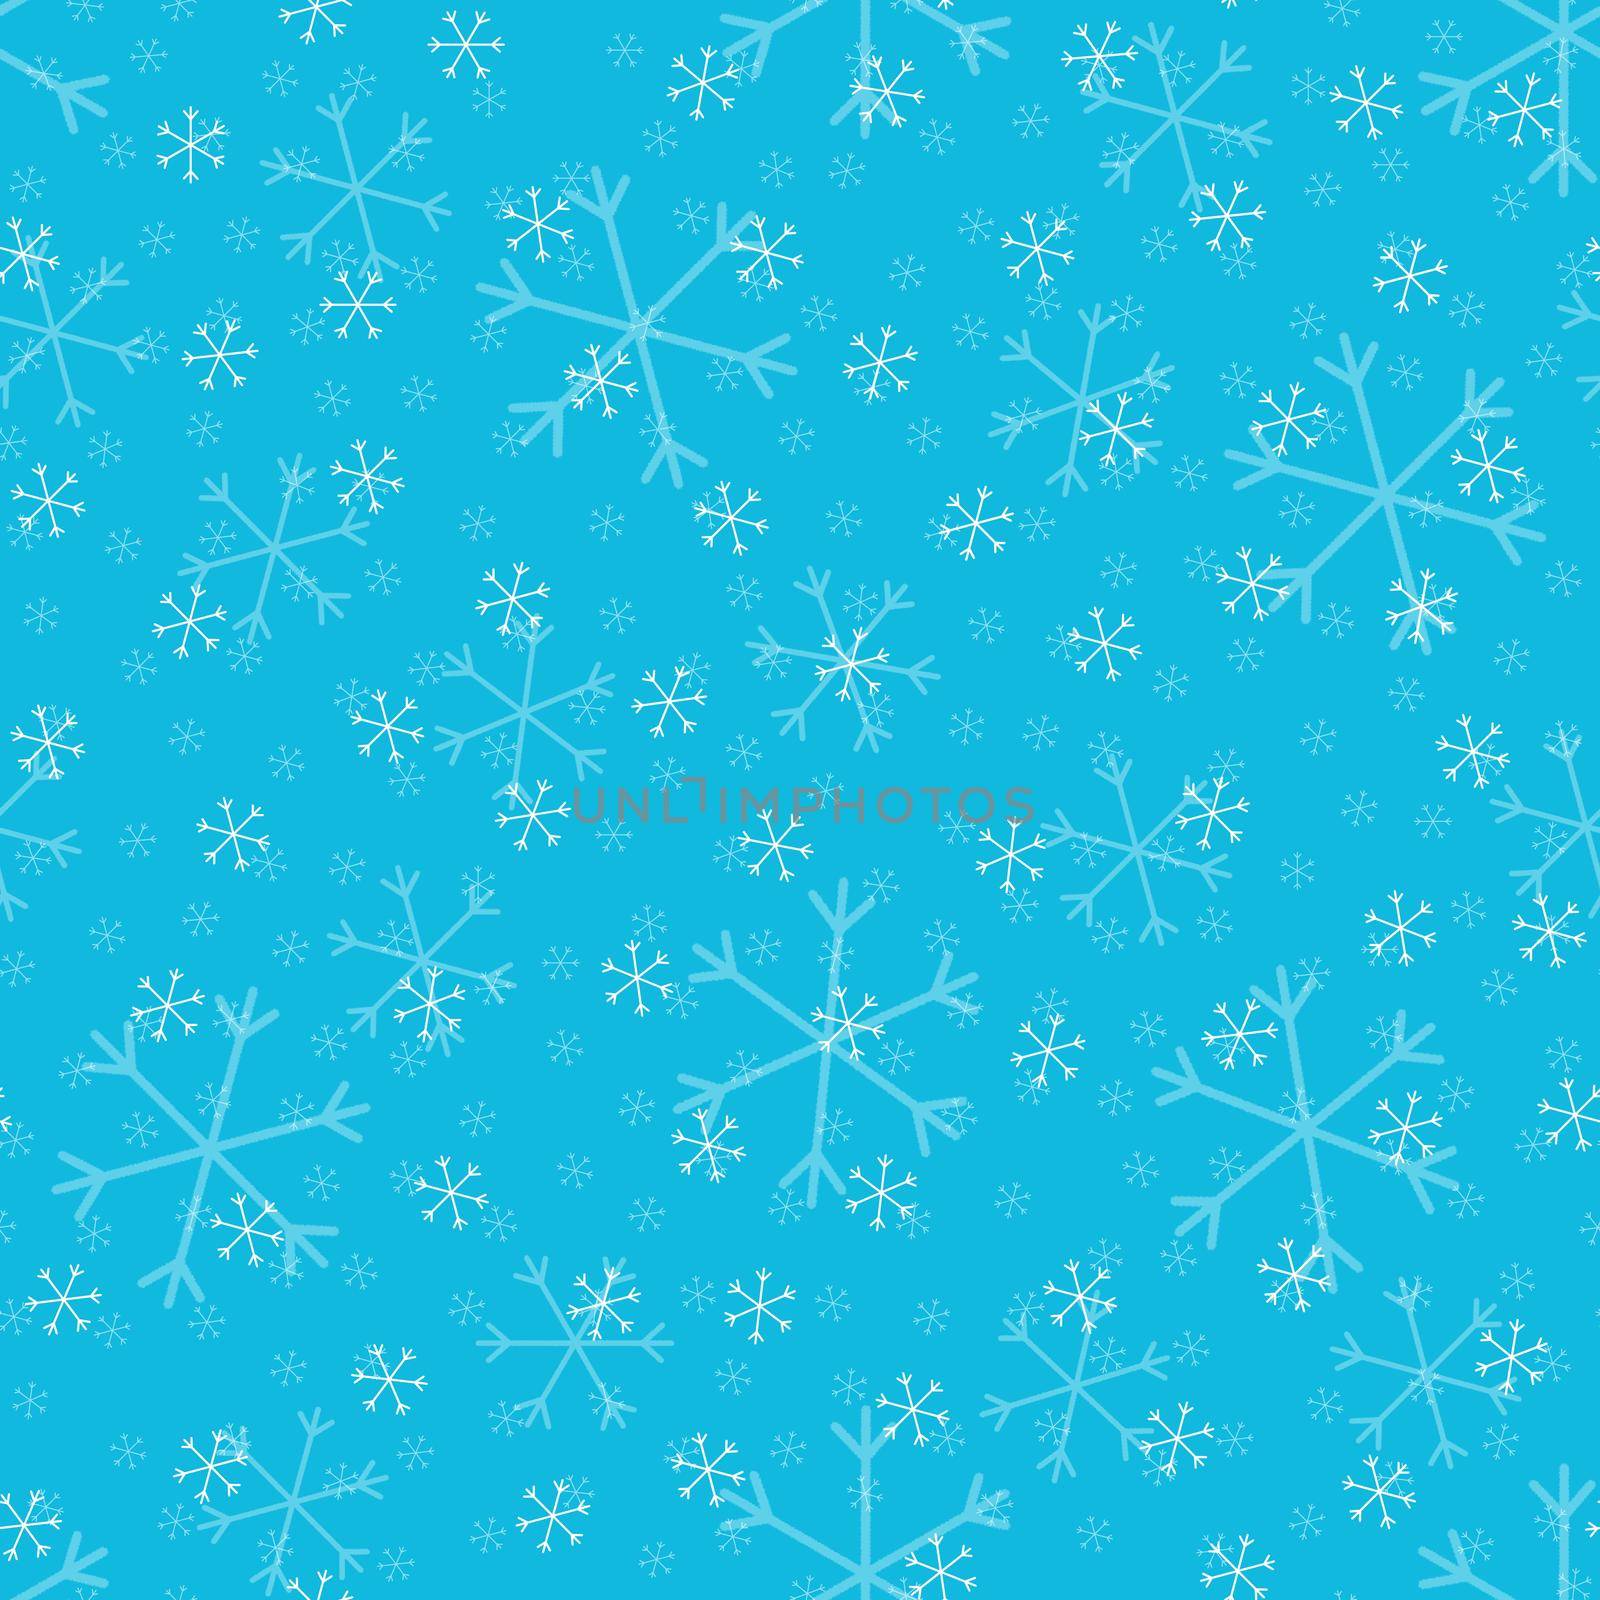 Seamless Christmas pattern doodle with hand random drawn snowflakes.Wrapping paper for presents, funny textile fabric print, design,decor, food wrap, backgrounds. new year.Raster copy.Sky blue, white by Angelsmoon